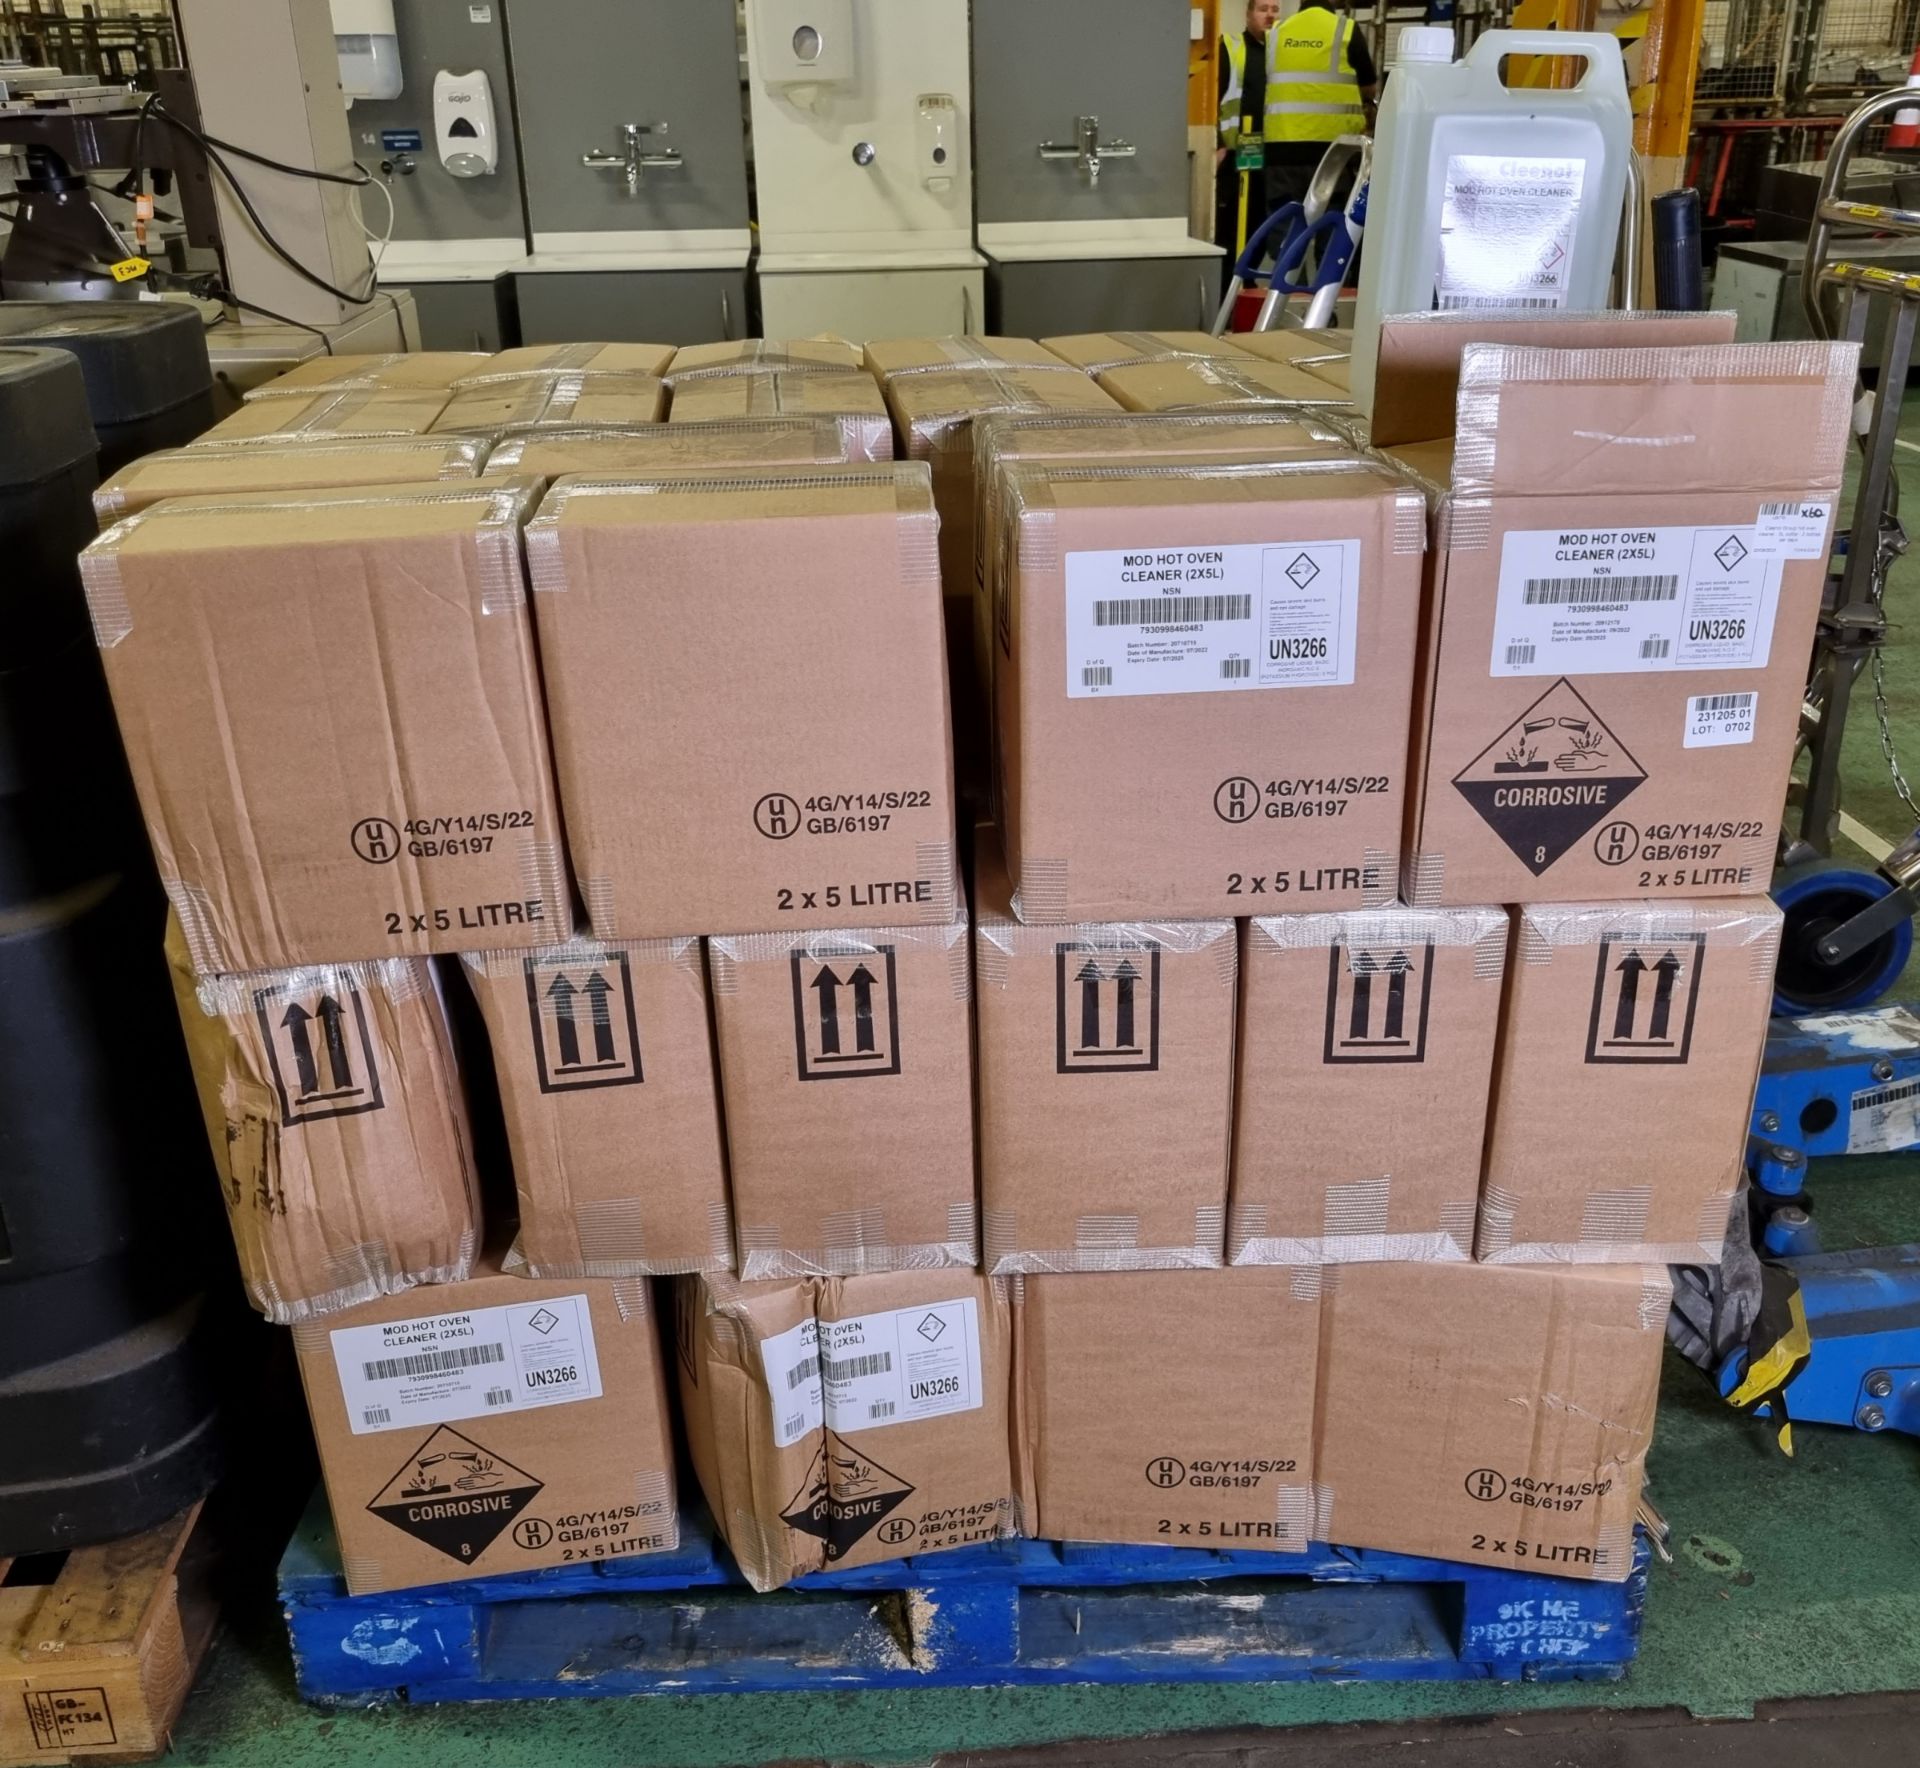 60x boxes of Cleenol Group hot oven cleaner - 5L bottle - 2 bottles per box